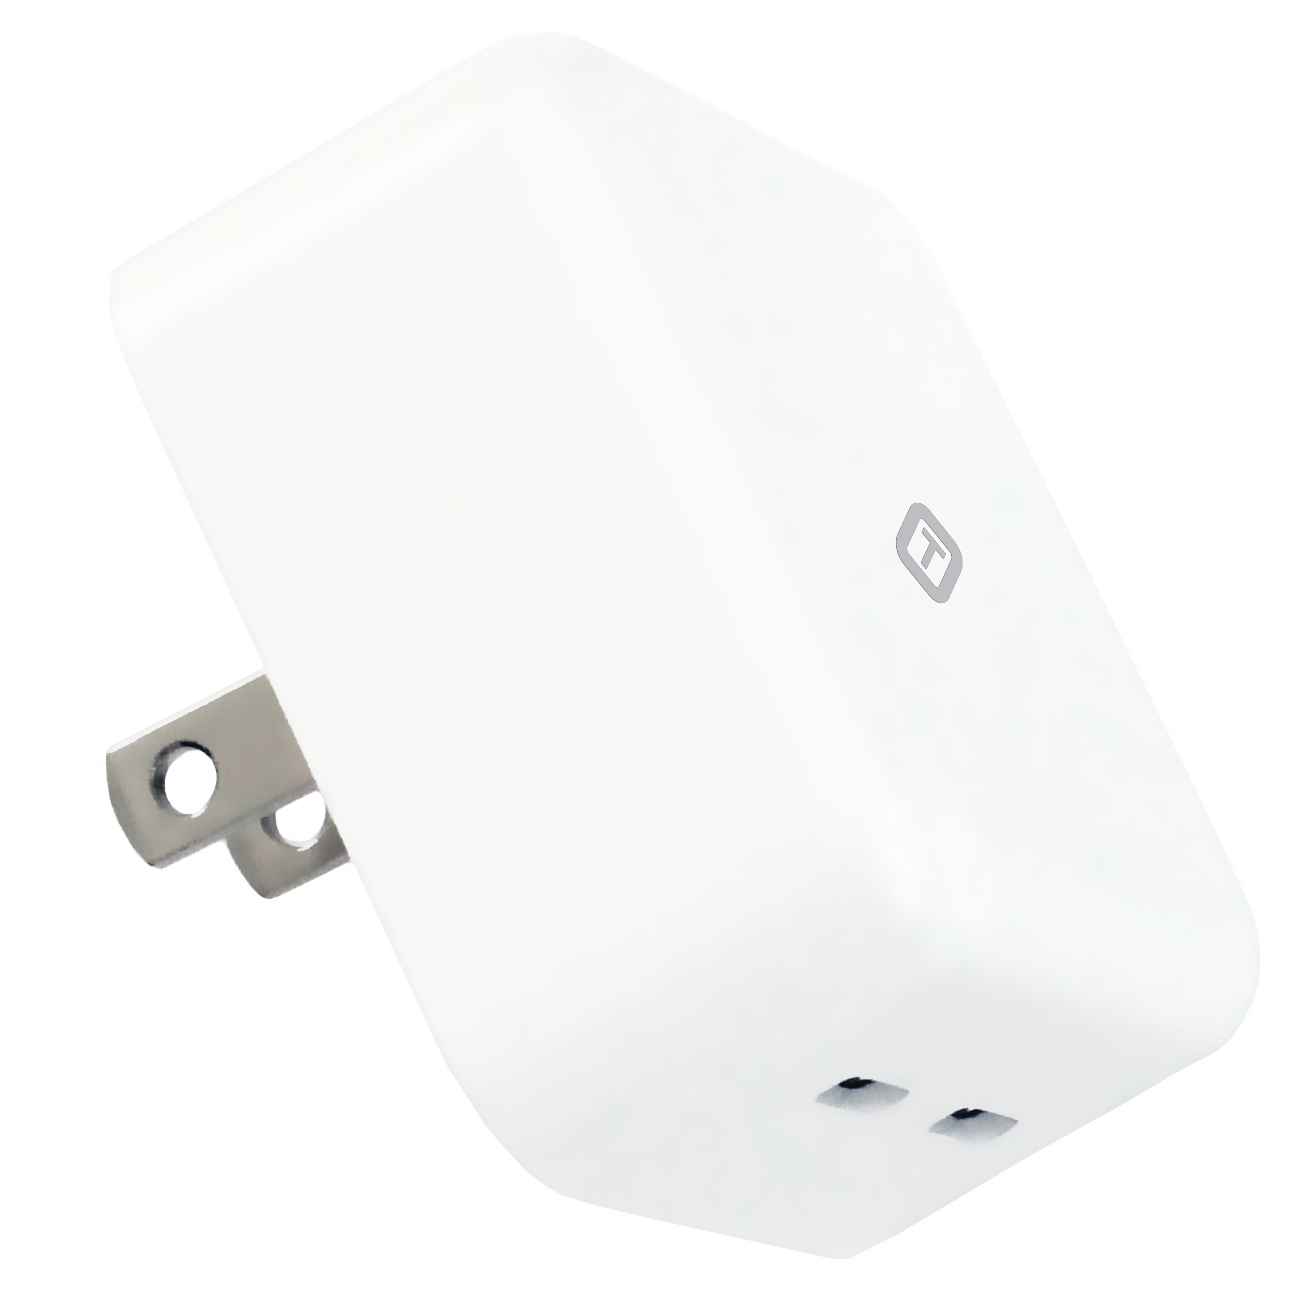 35W PD Dual USB-C Wall Charger